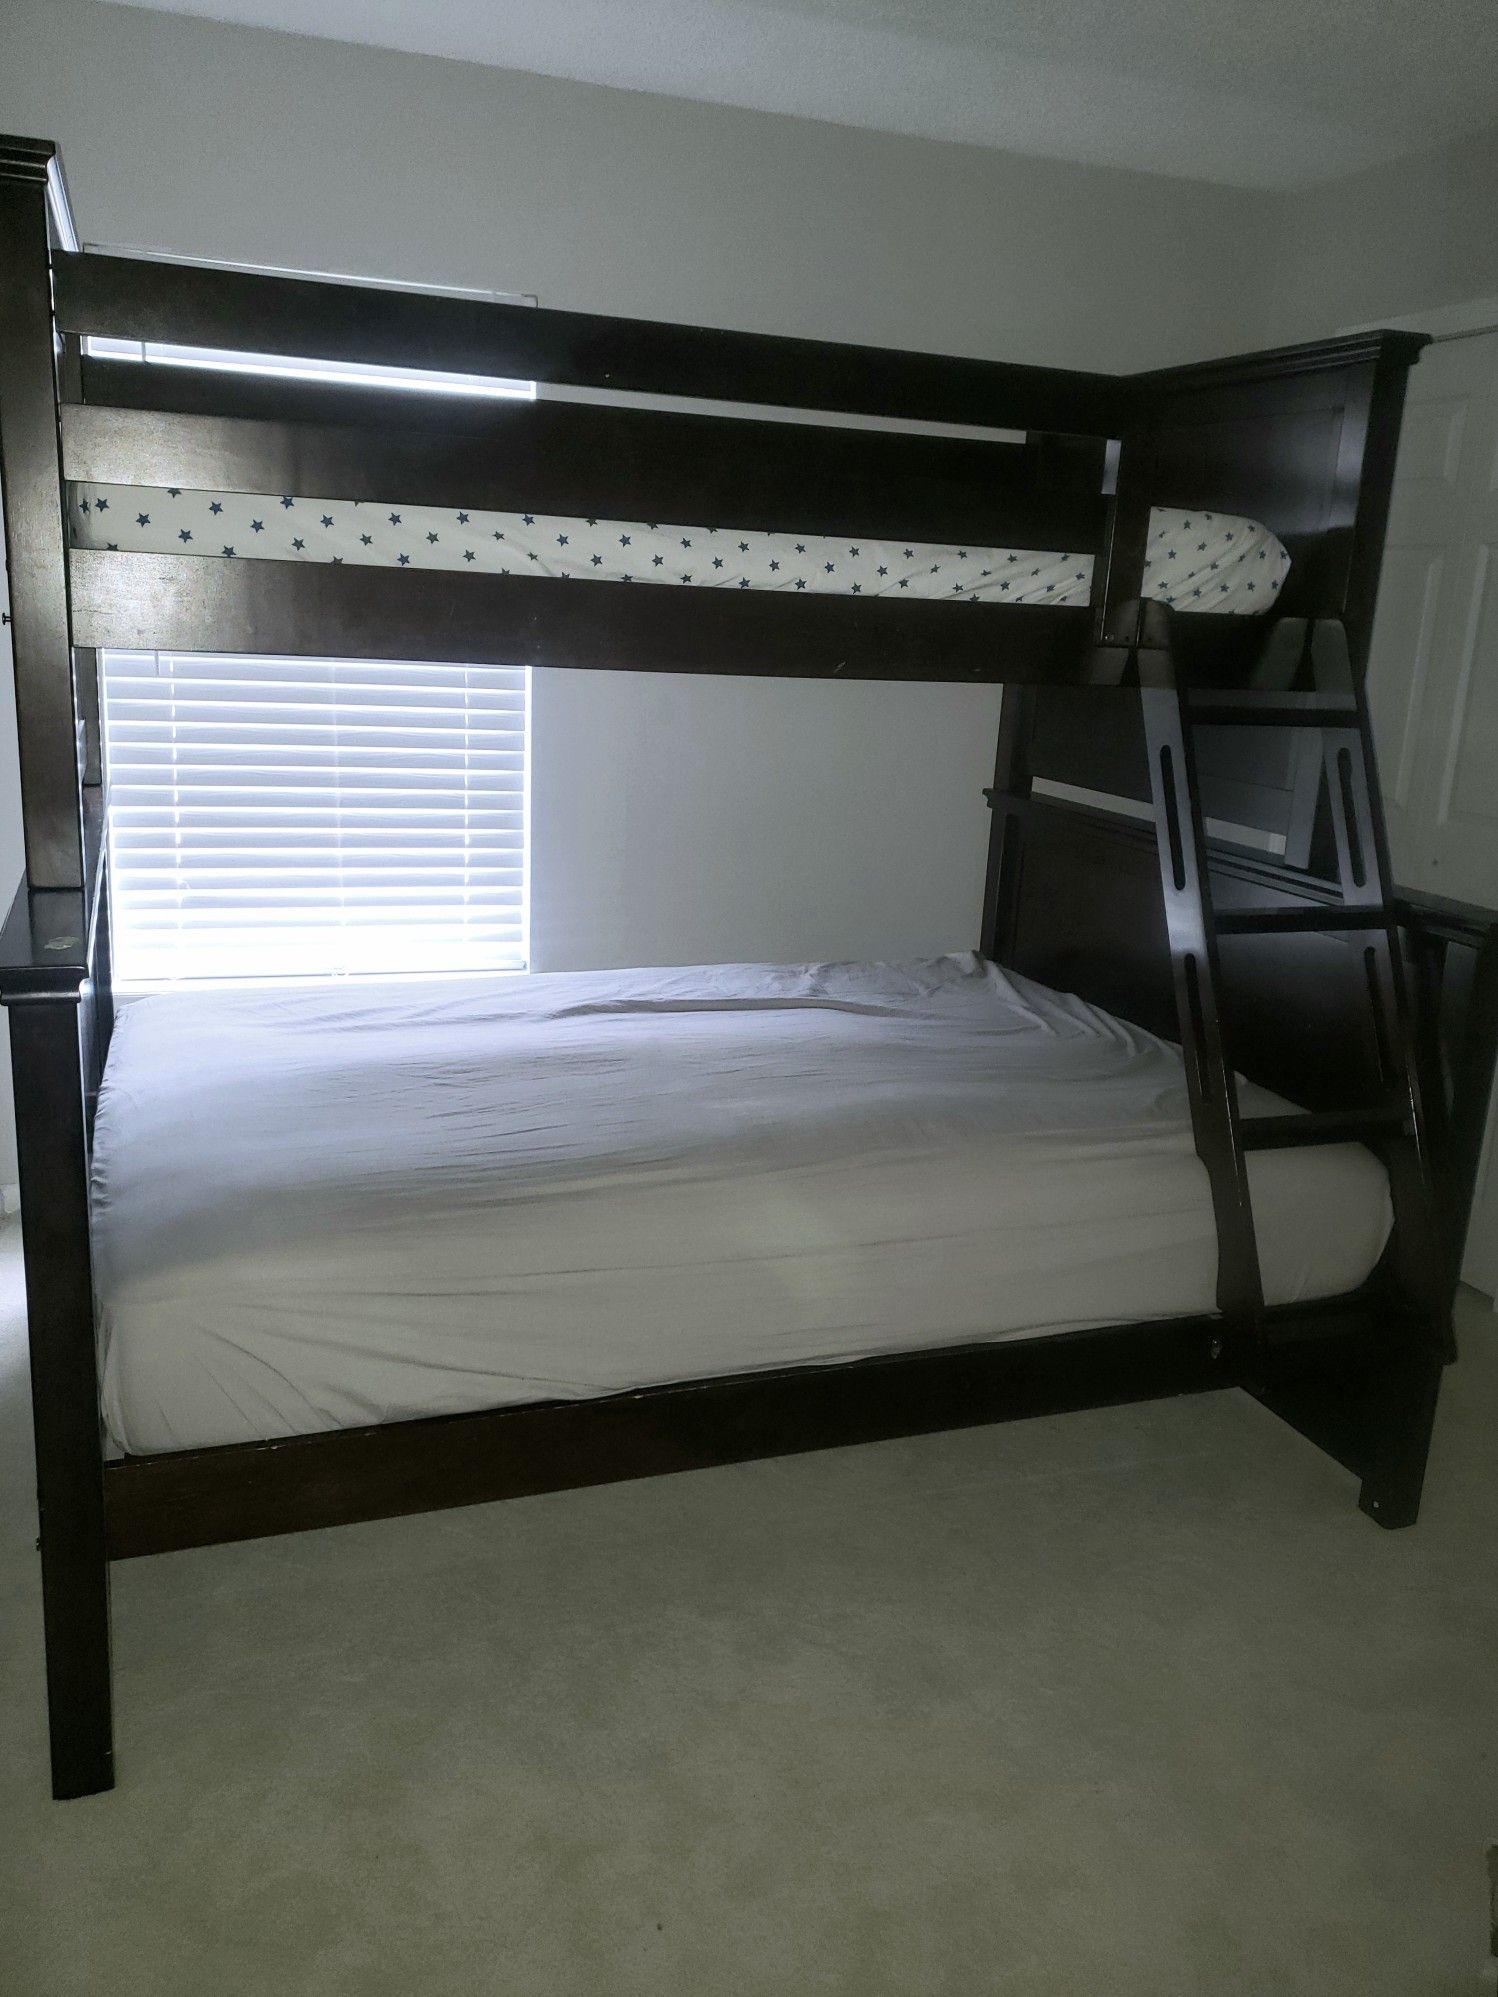 Twin bed. Bayside Furnishings. Twin Over Full Bunk Bed. With mattress.